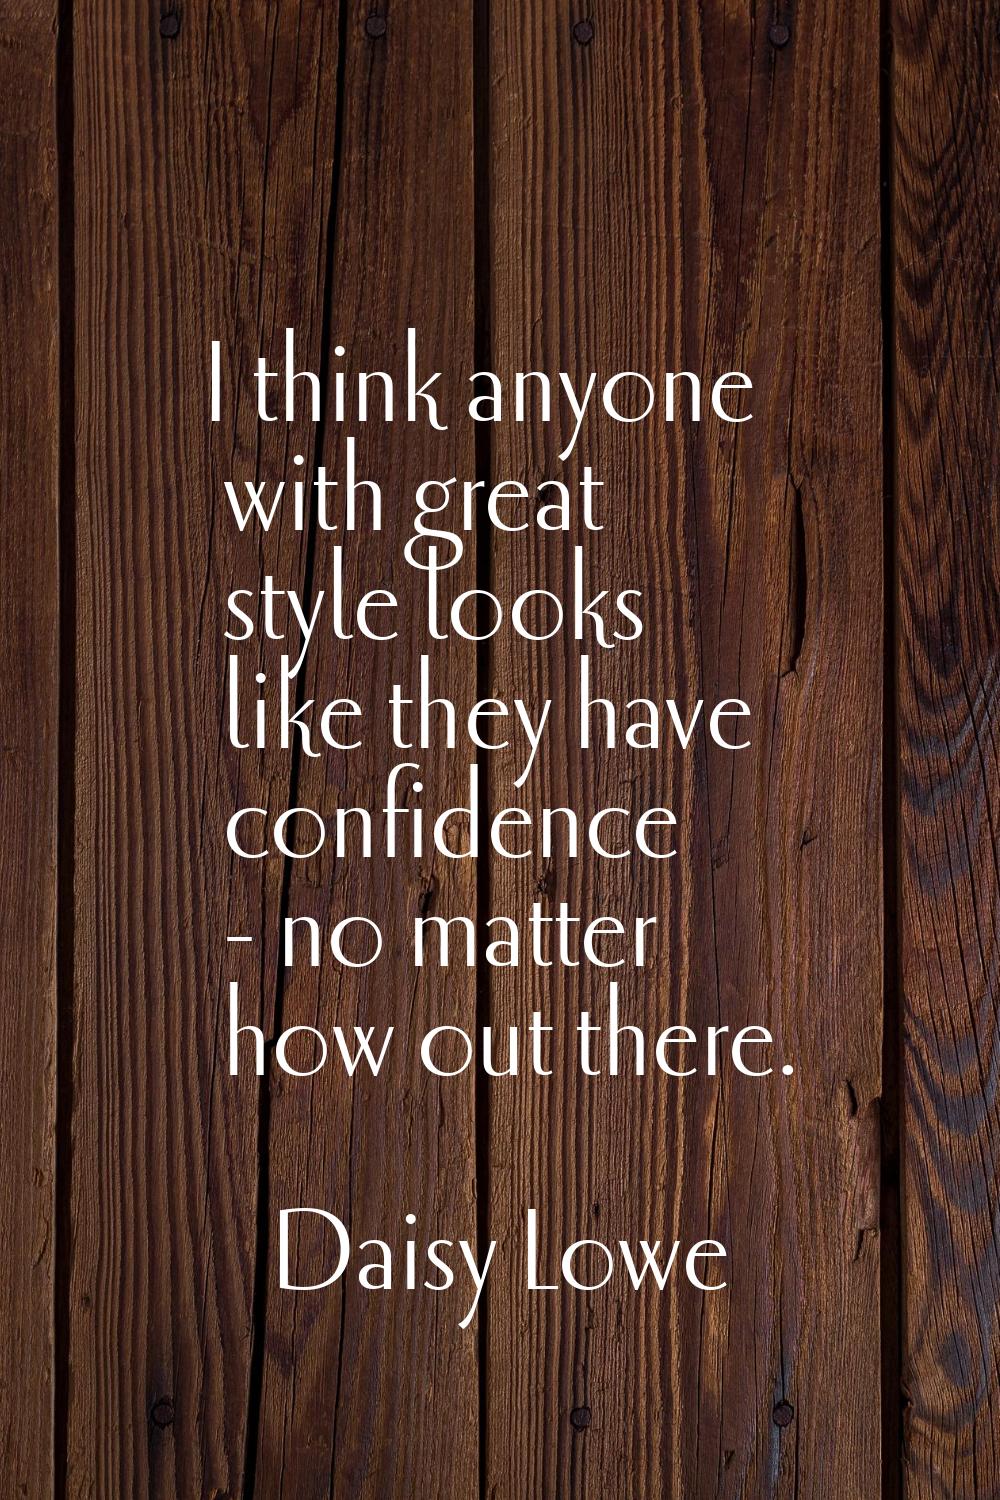 I think anyone with great style looks like they have confidence - no matter how out there.